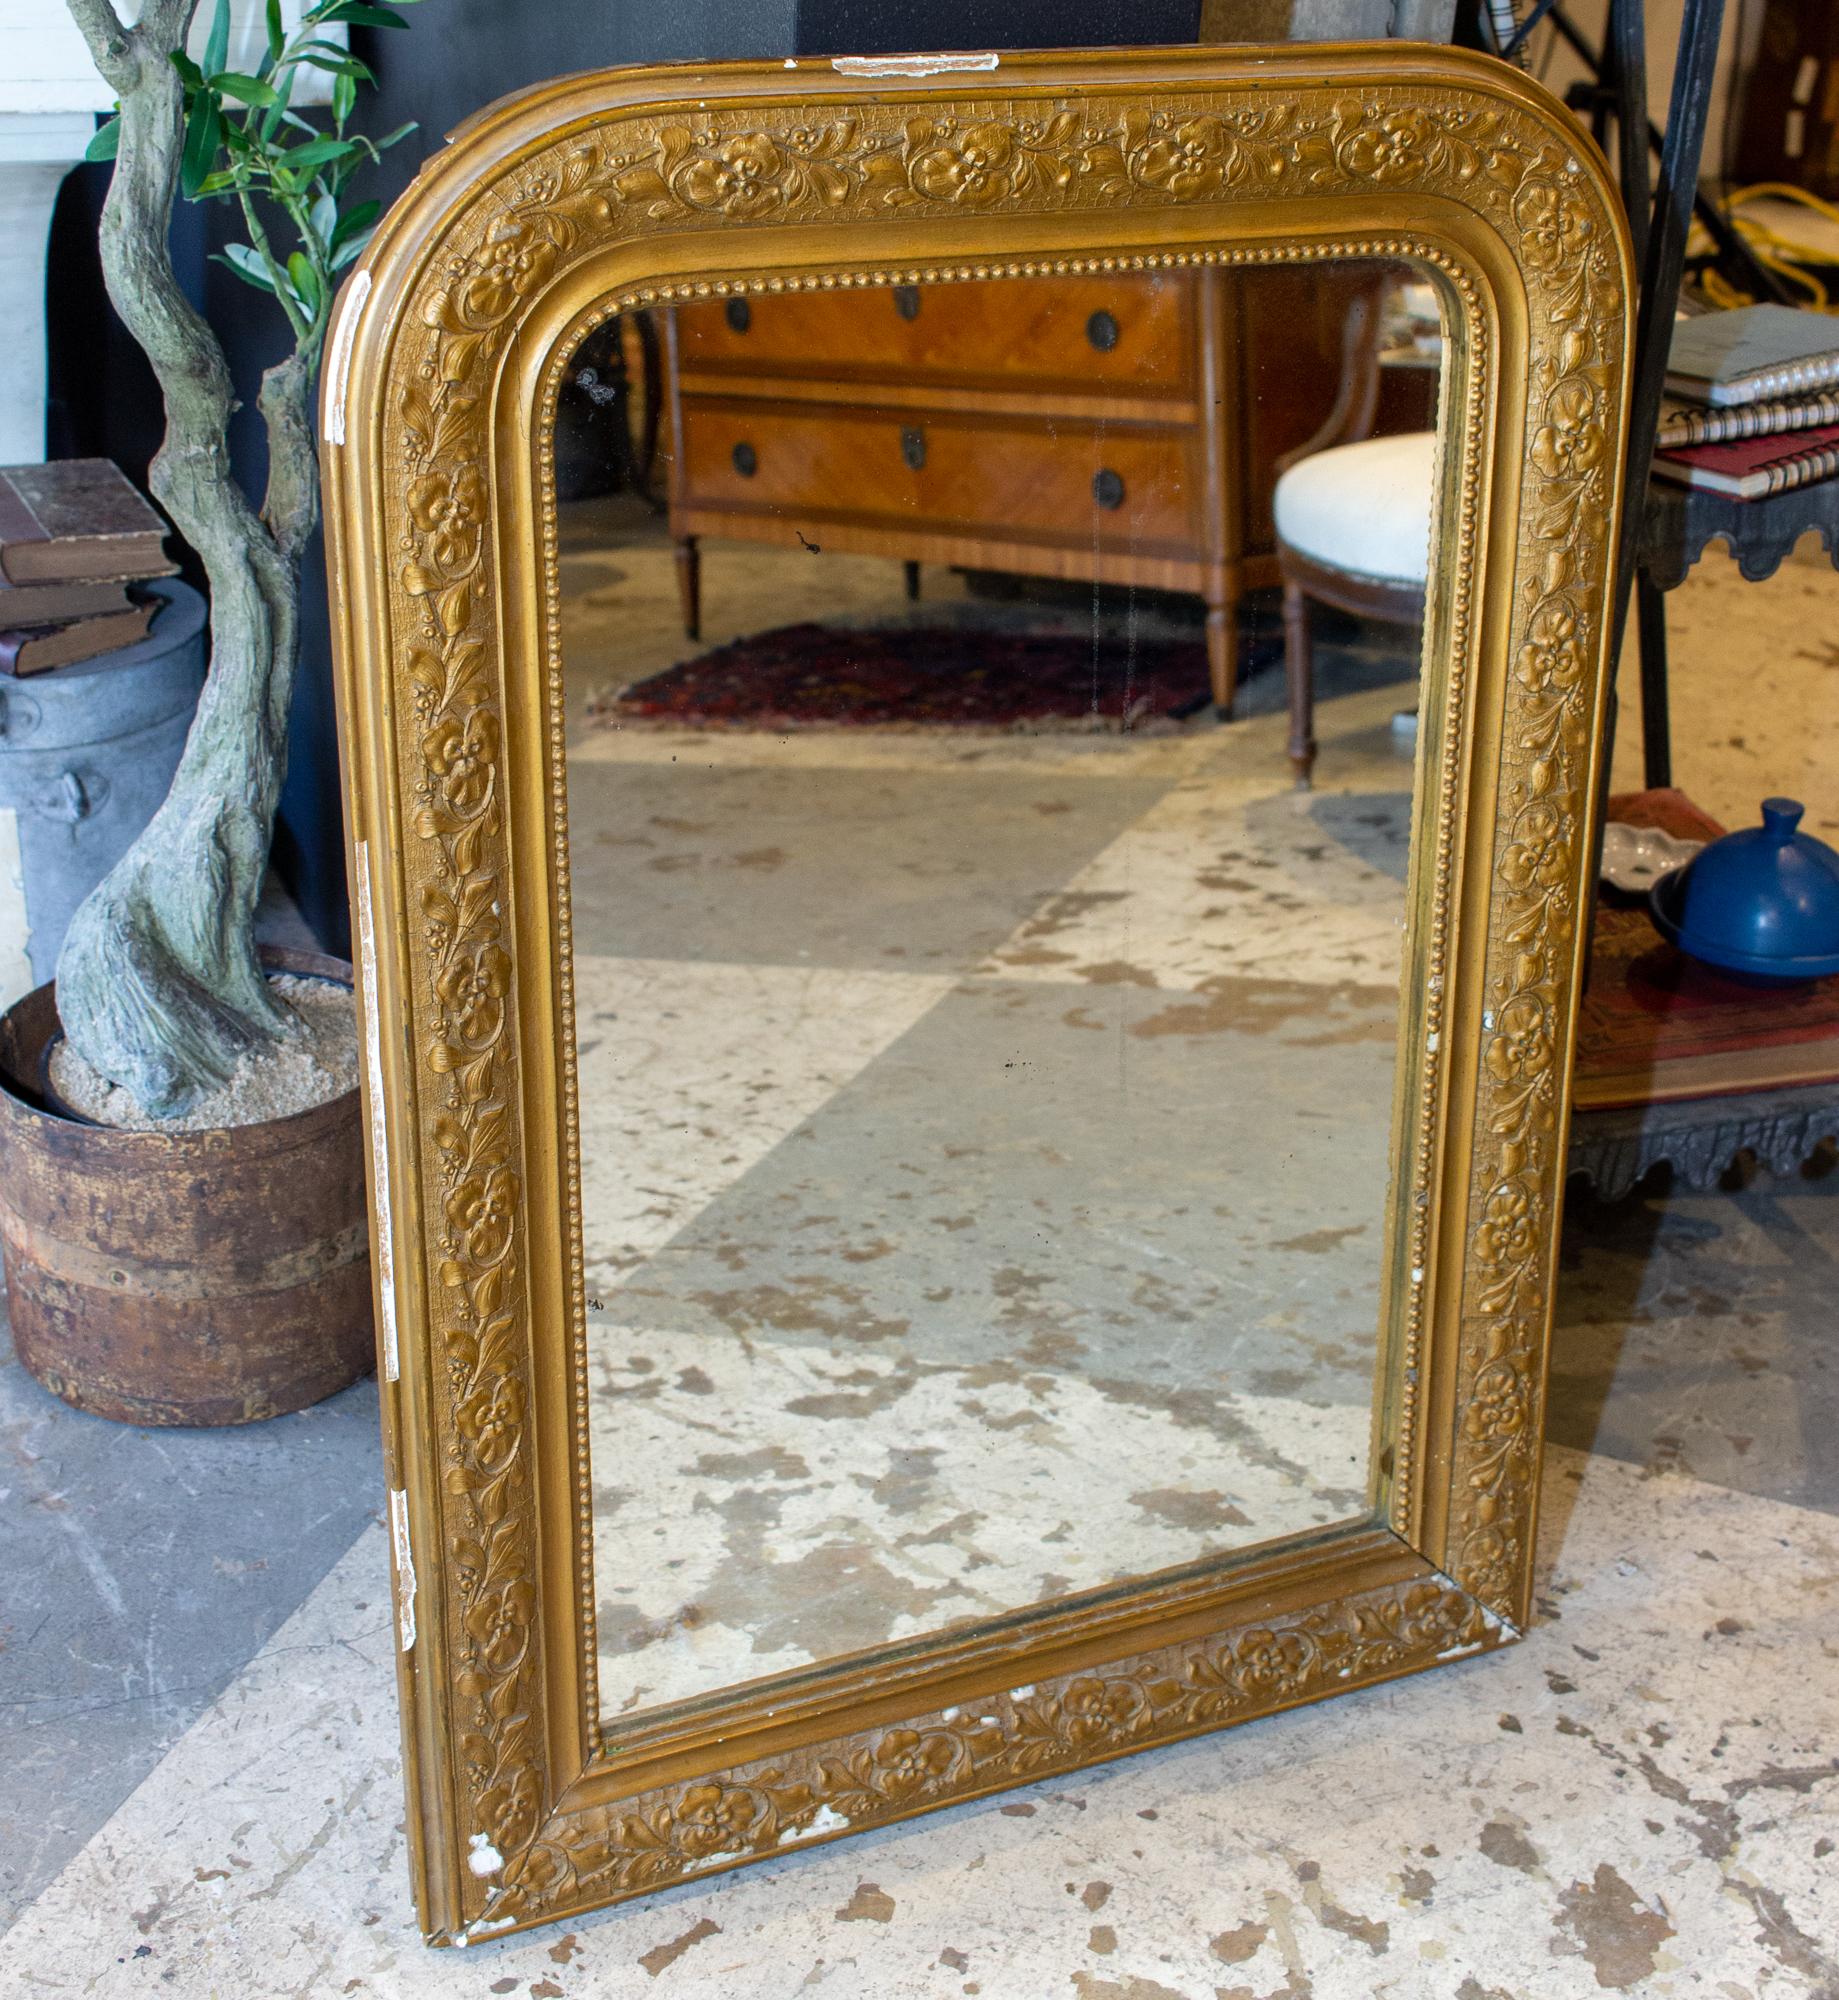 This antique French Louis Philippe mirror has a distressed gold finish with a raised floral pattern molding along the center of the frame and a beaded interior edge. The flowers appear to be pansies. Mirror is in good condition, with some spotting